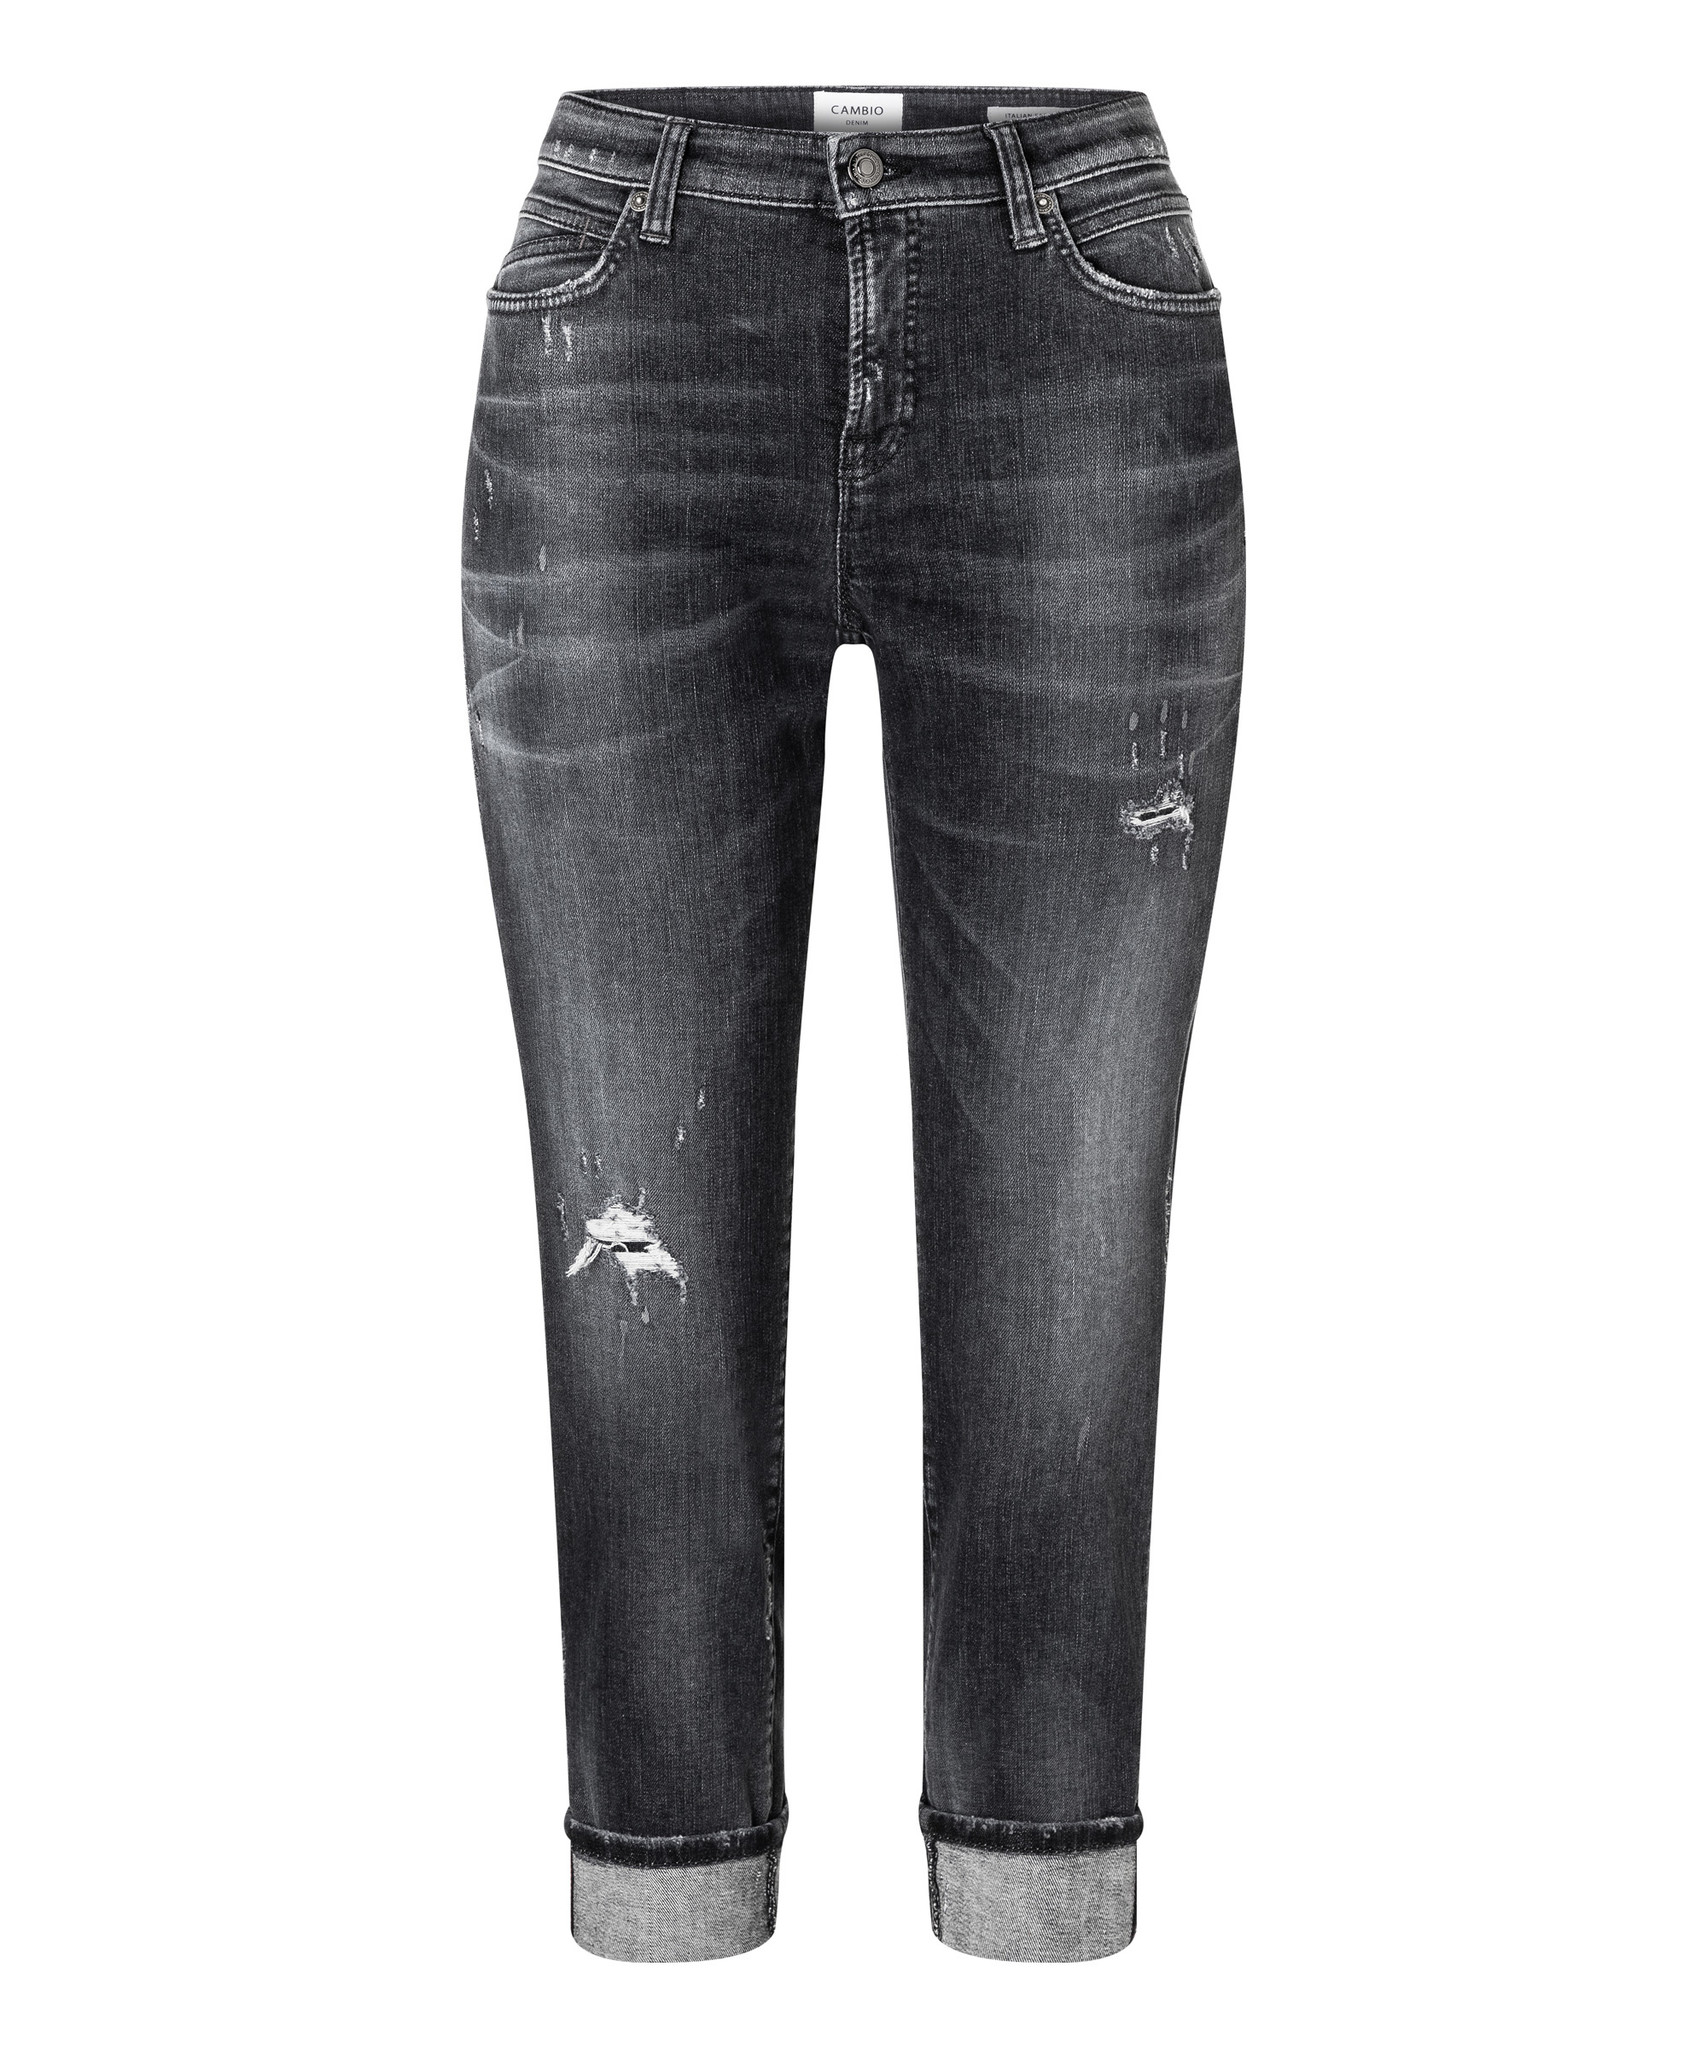 Cambio Jeans 9226 KERRY-1